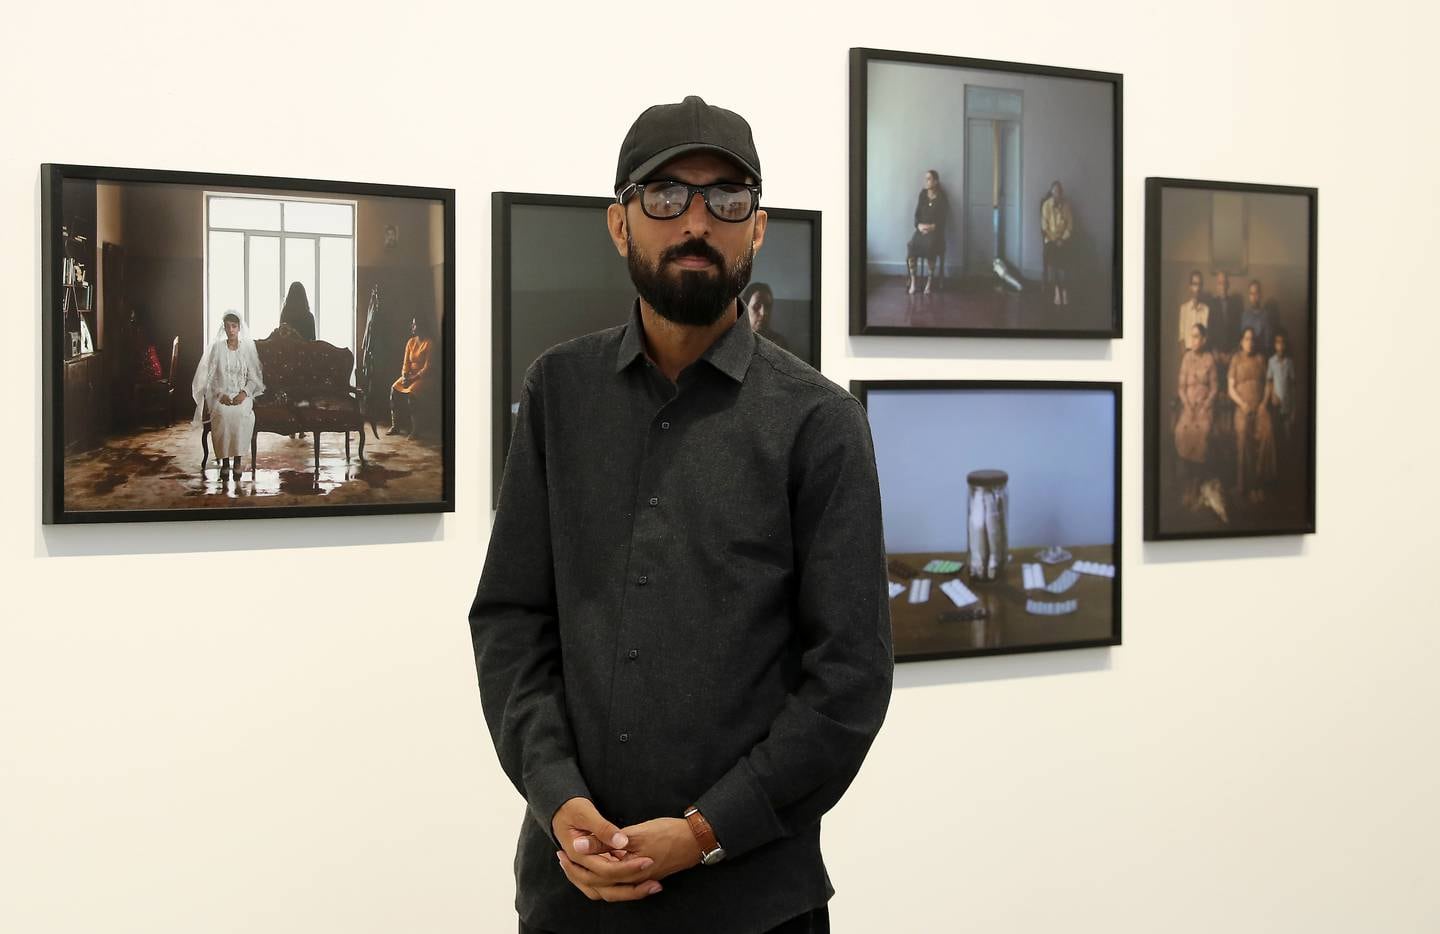 Morteza Niknahad with his 'Big Fish' photographs, which are on display as part of the Vantage Point Sharjah exhibition. Pawan Singh / The National